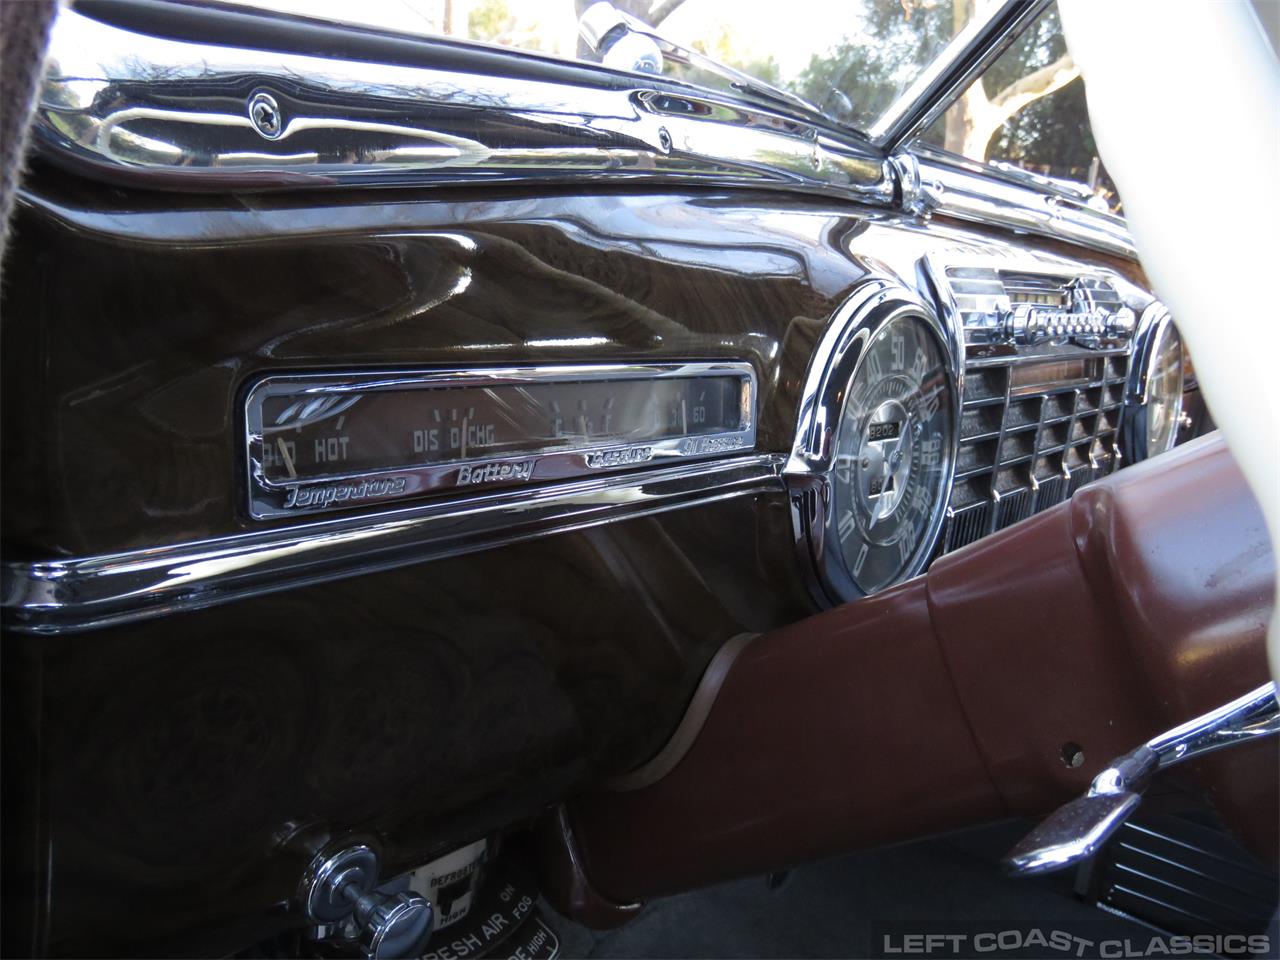 1941 Cadillac Fleetwood 60 Special for sale in Sonoma, CA – photo 63